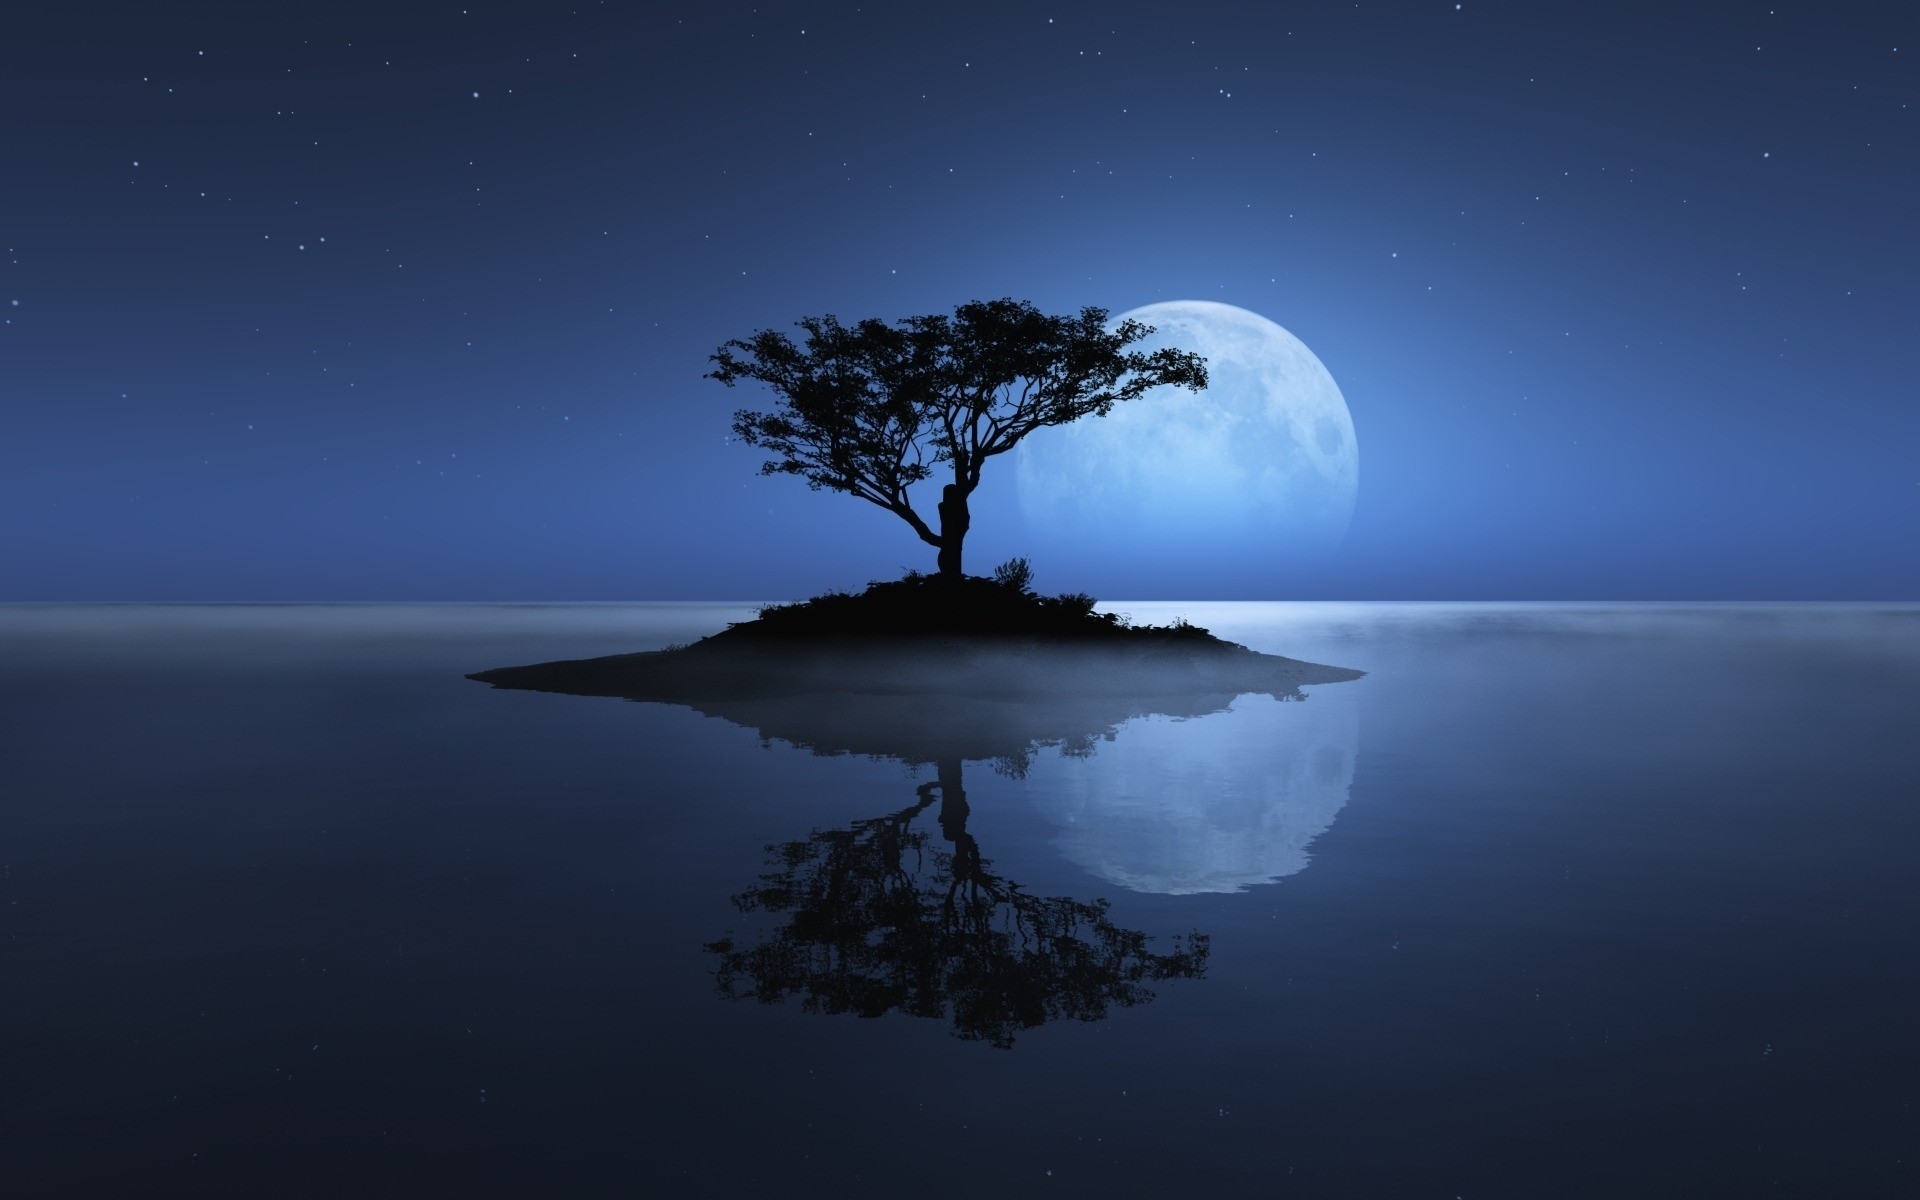 landscapes water travel moon sky evening nature outdoors tree dawn landscape background sea